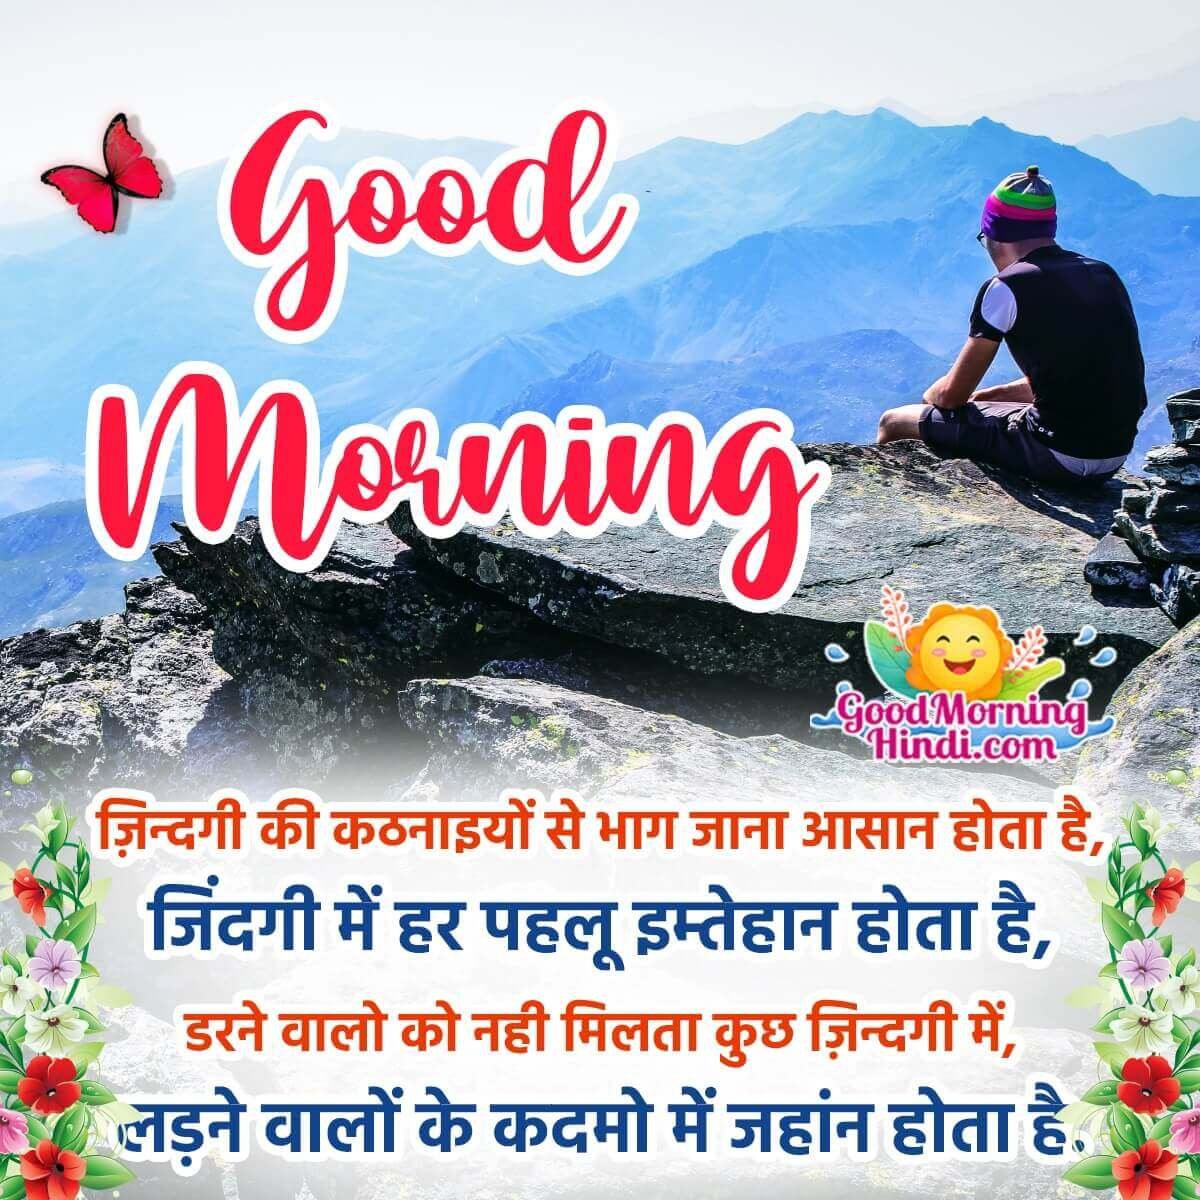 Good Morning Hindi Status Images - Good Morning Wishes & Images In ...